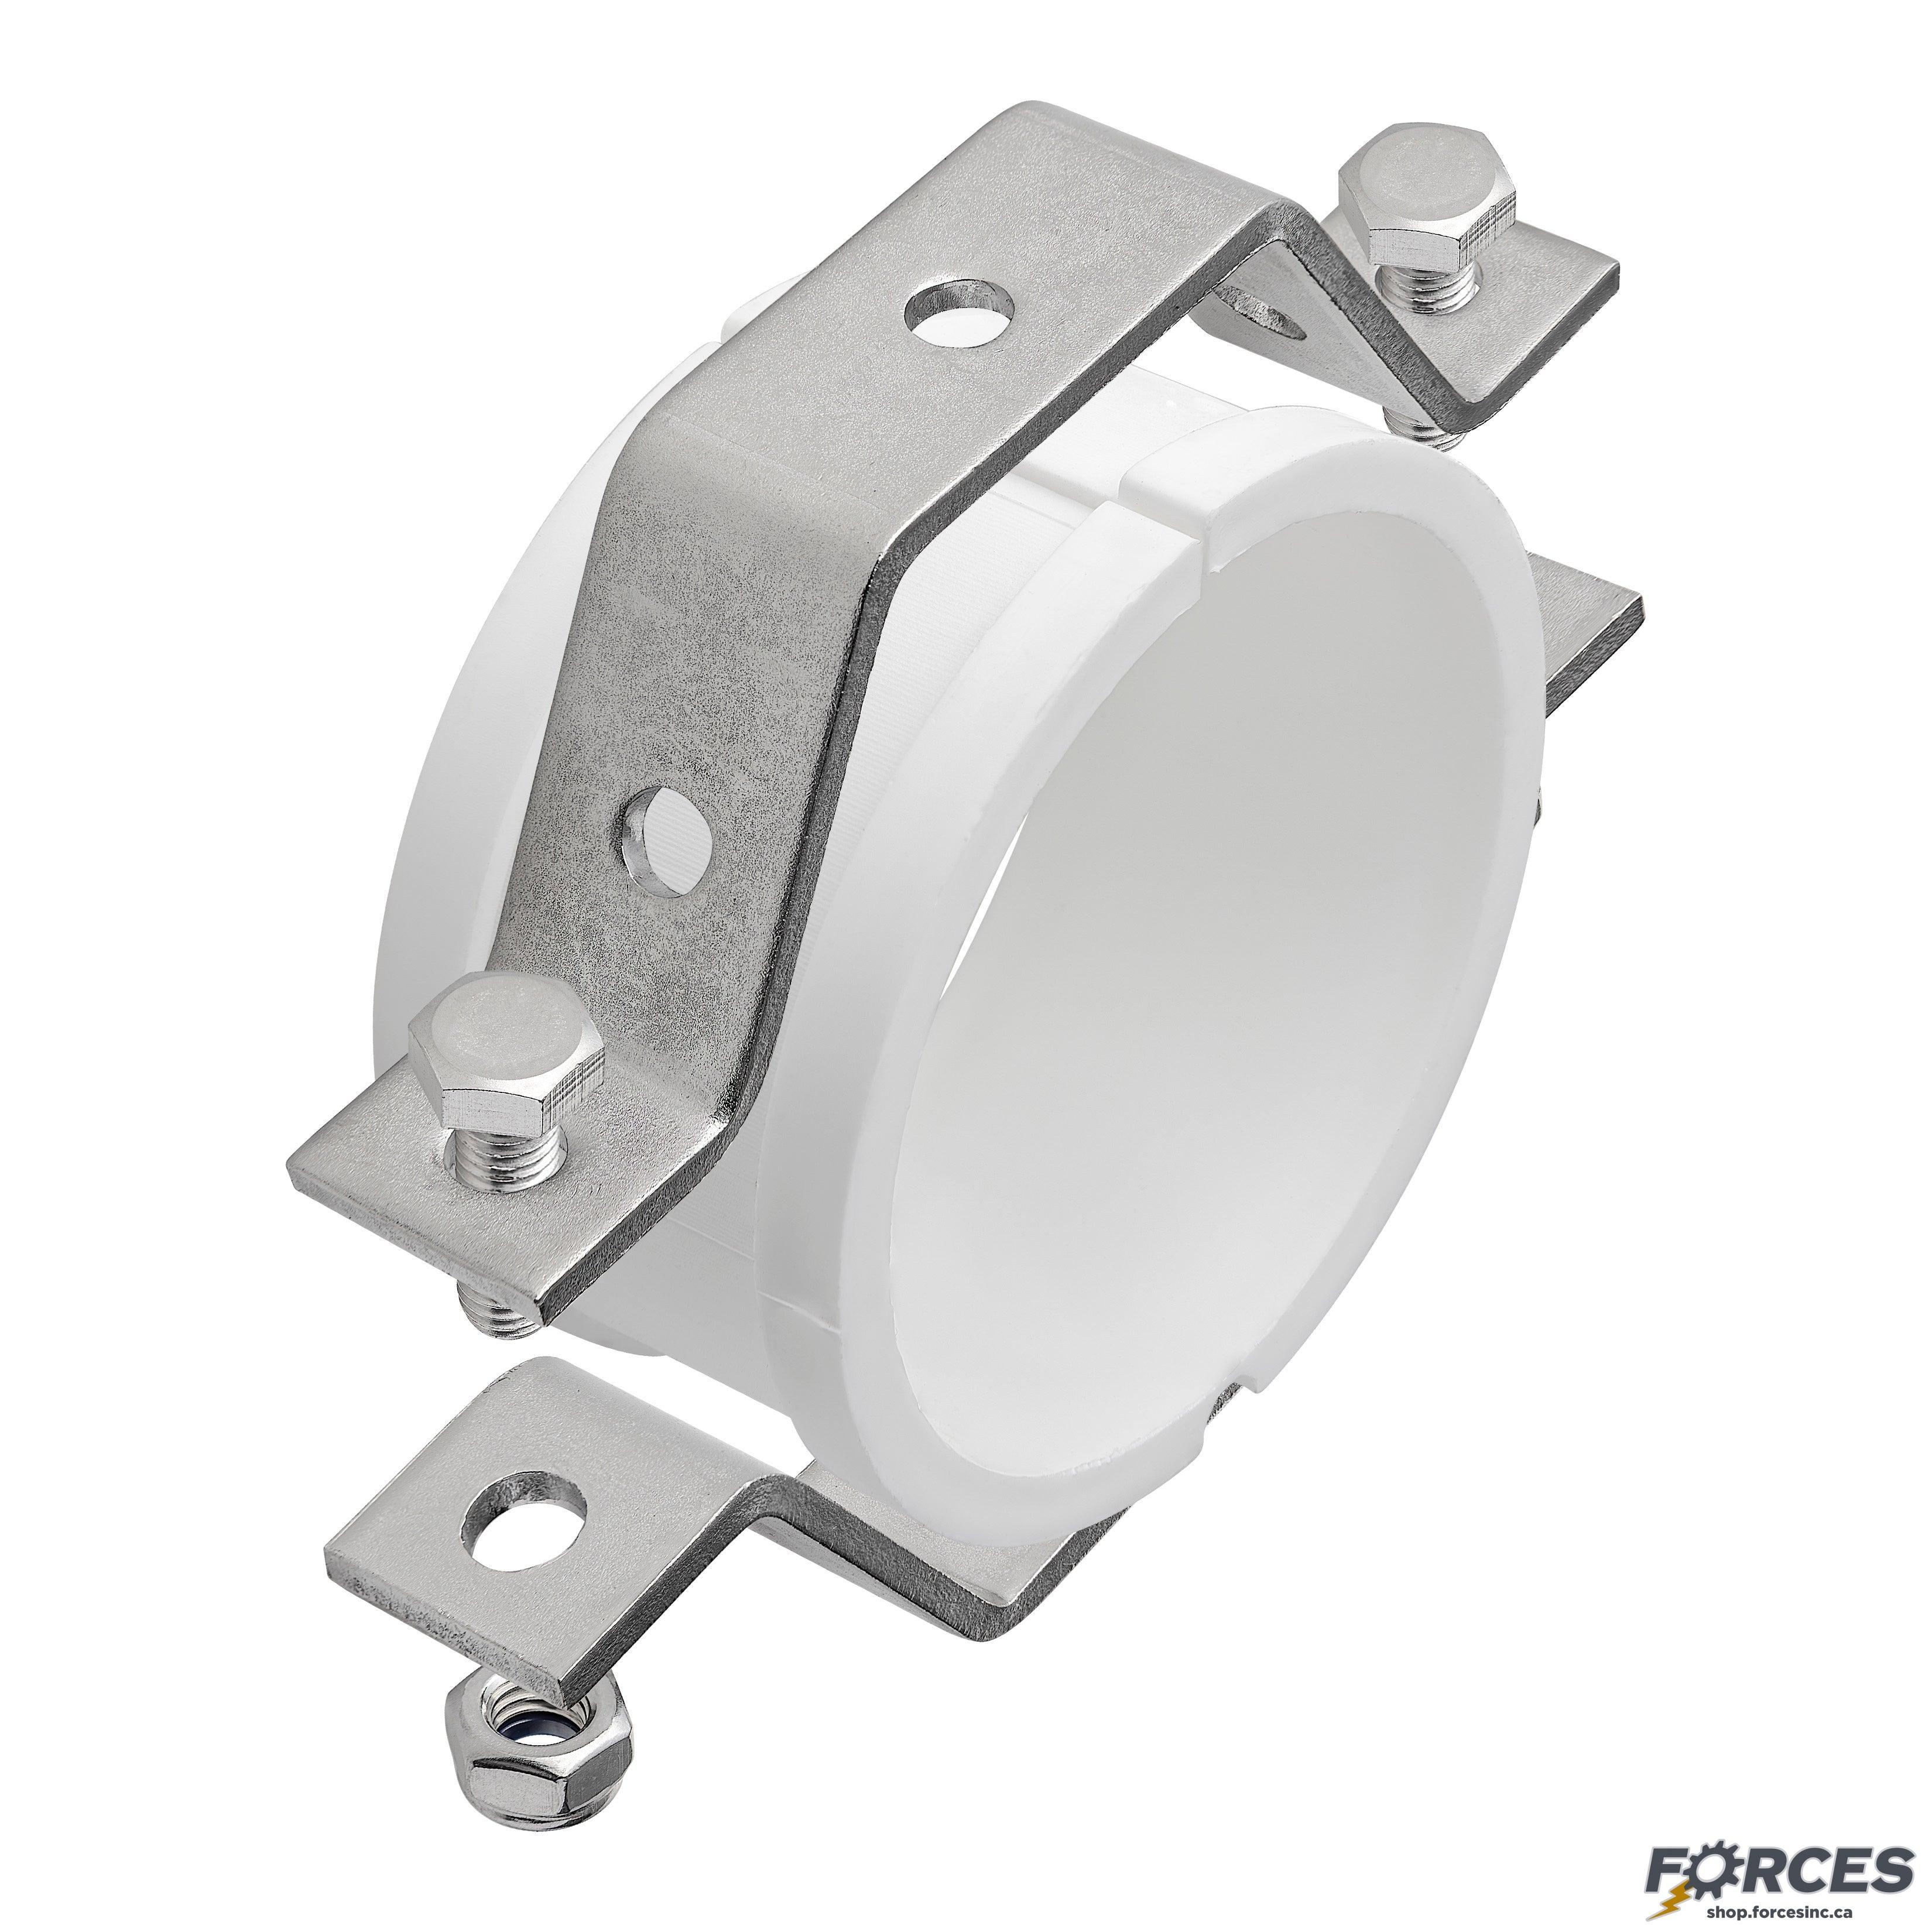 2-1/2" Hanger for Sanitary Tube With PVC Insert 304 Stainless Steel - Forces Inc